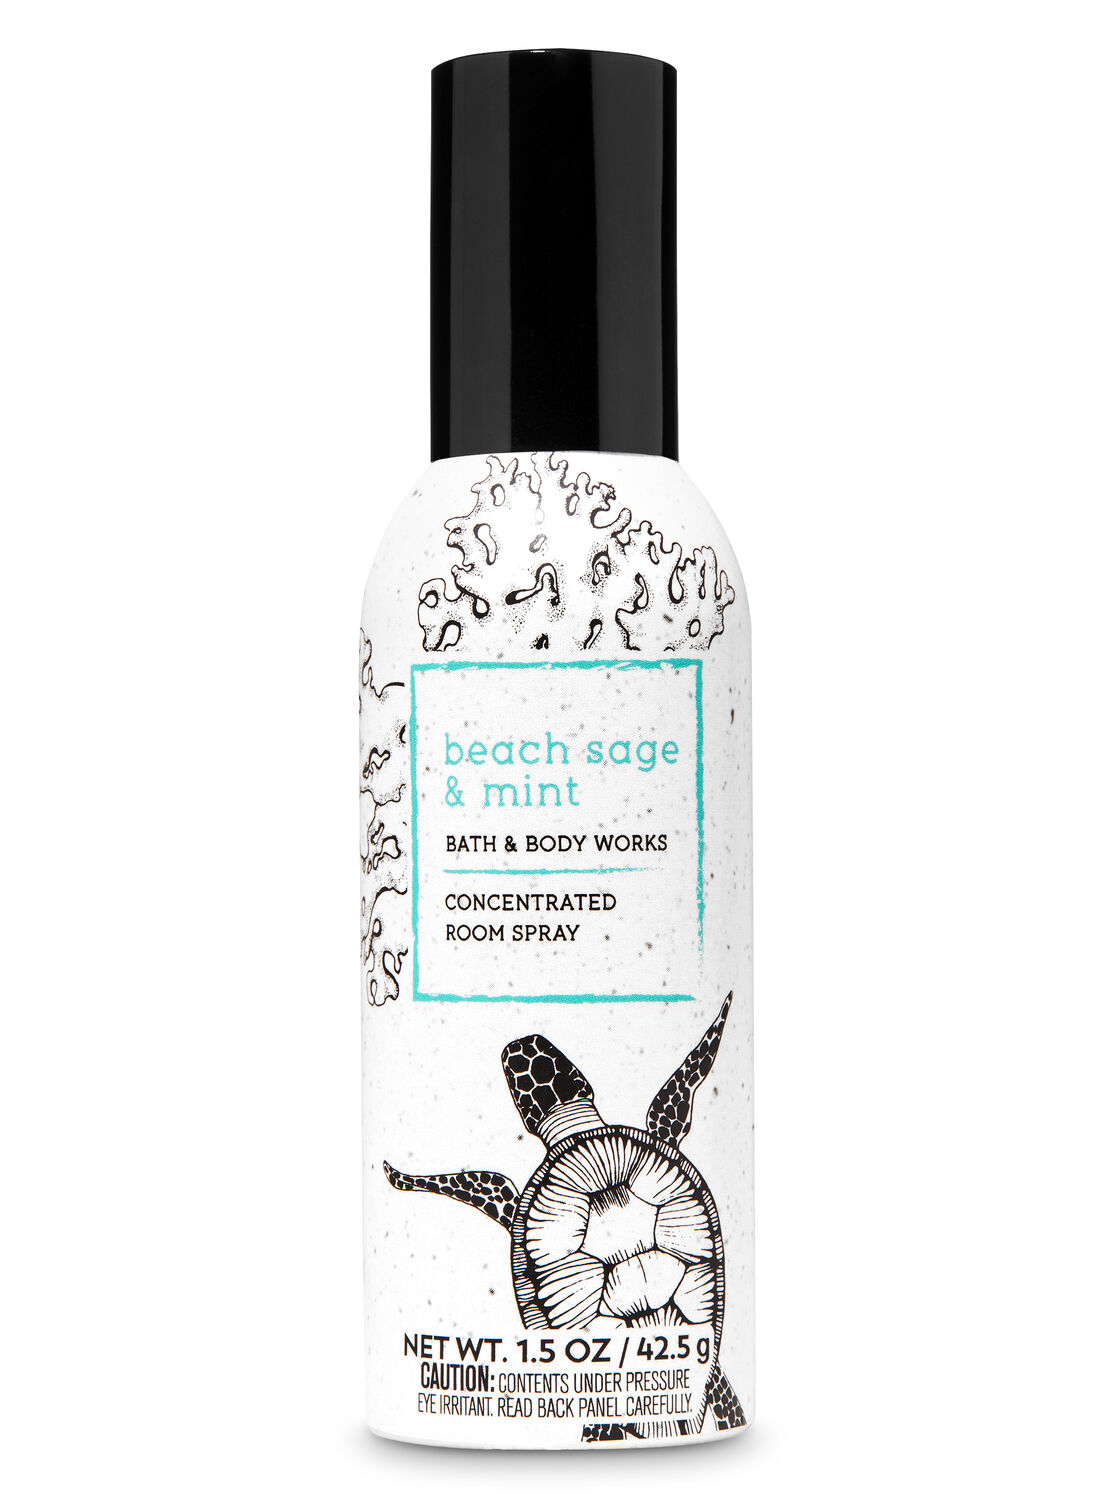 Beach Sage Mint Concentrated Room Spray Bath Body Works